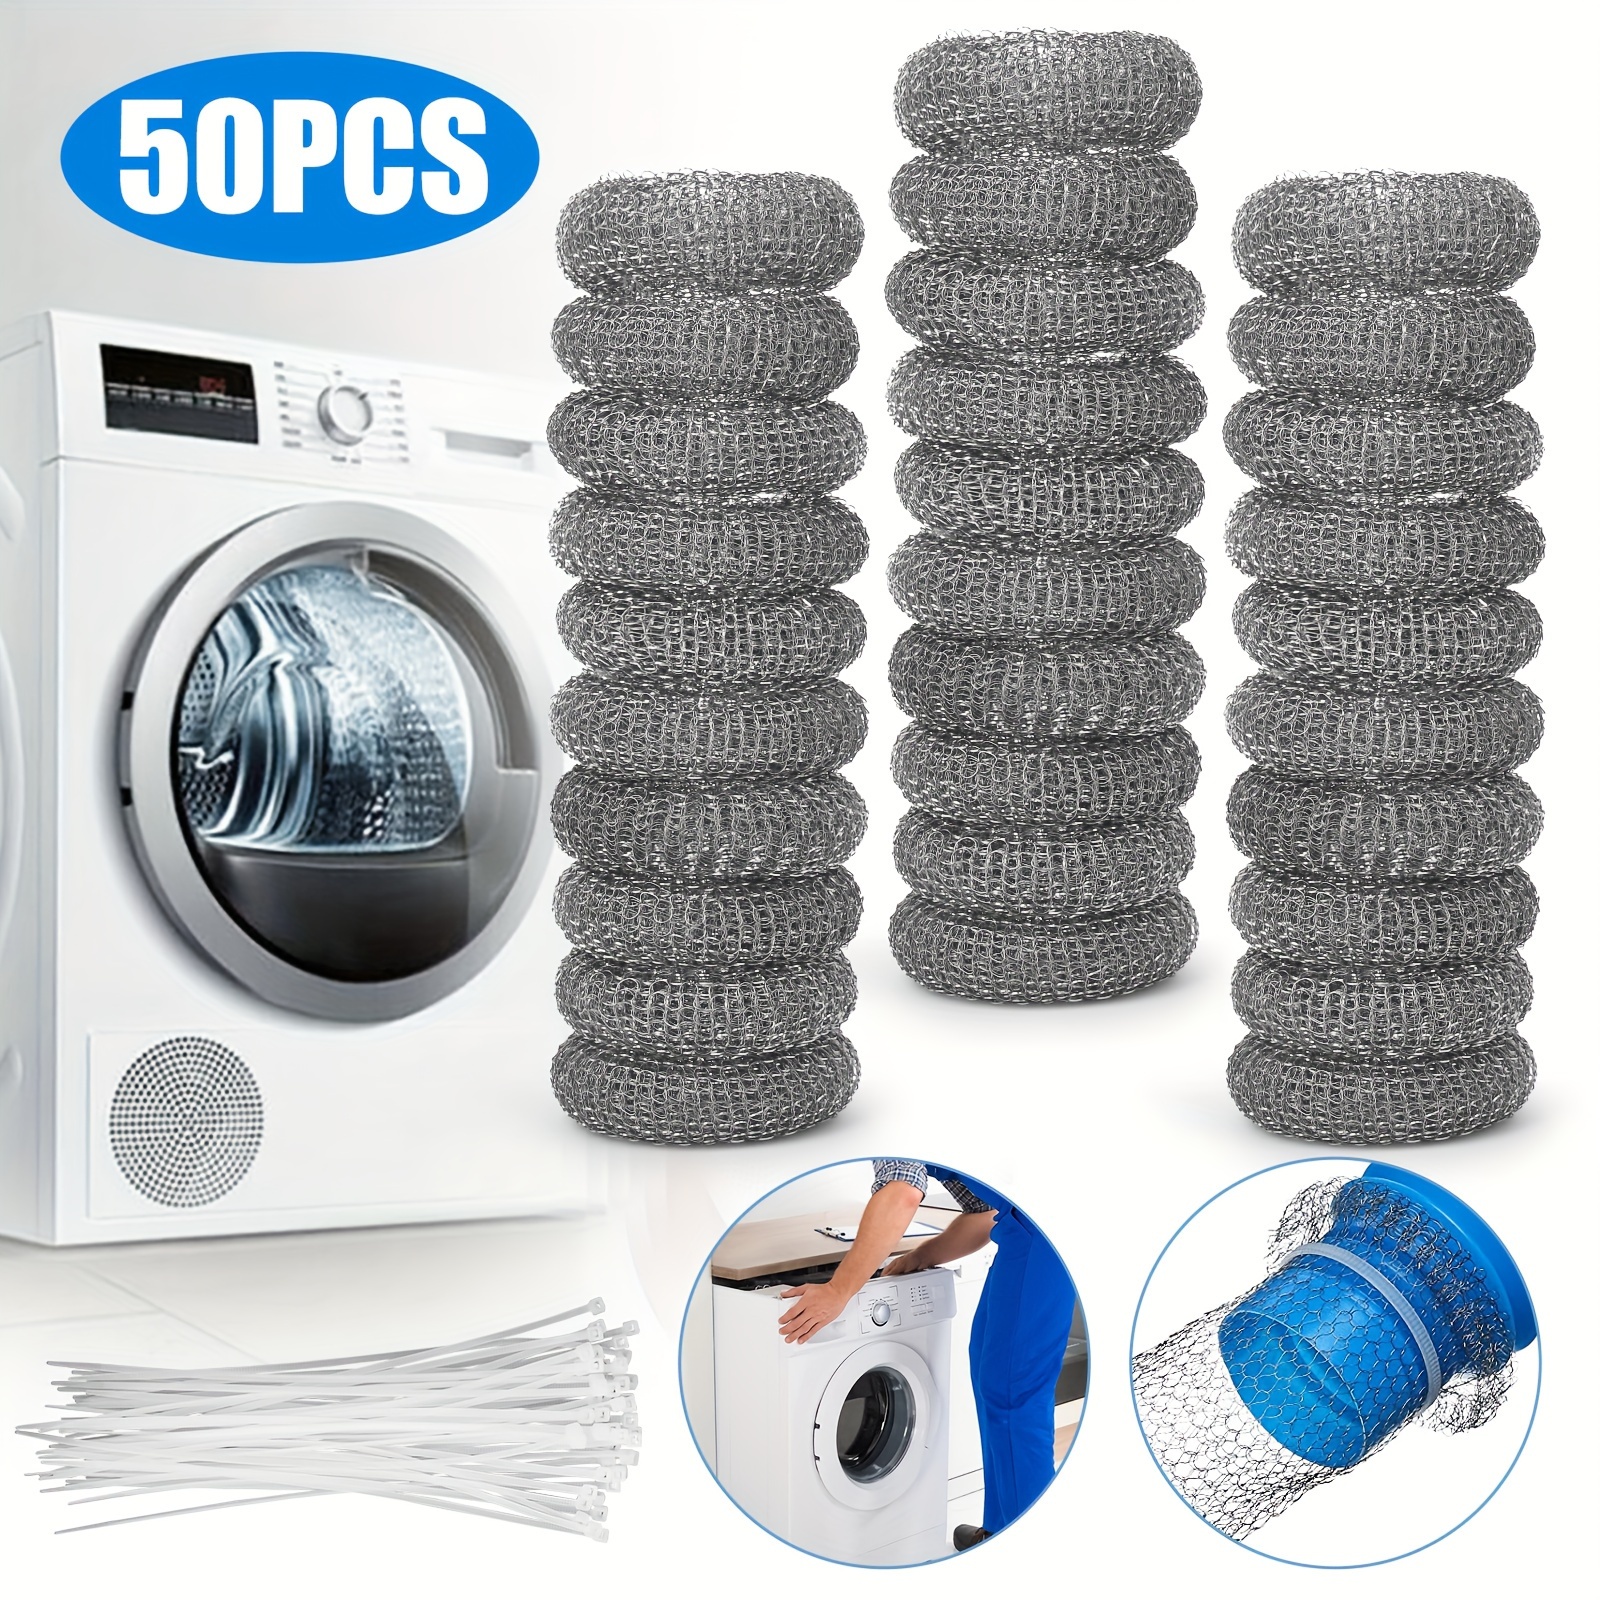 

50pcs Lint Traps For Washing Machine Drain Hose, Steel Filter Screen With Nylon Tie, Washer Hose Lint Catcher